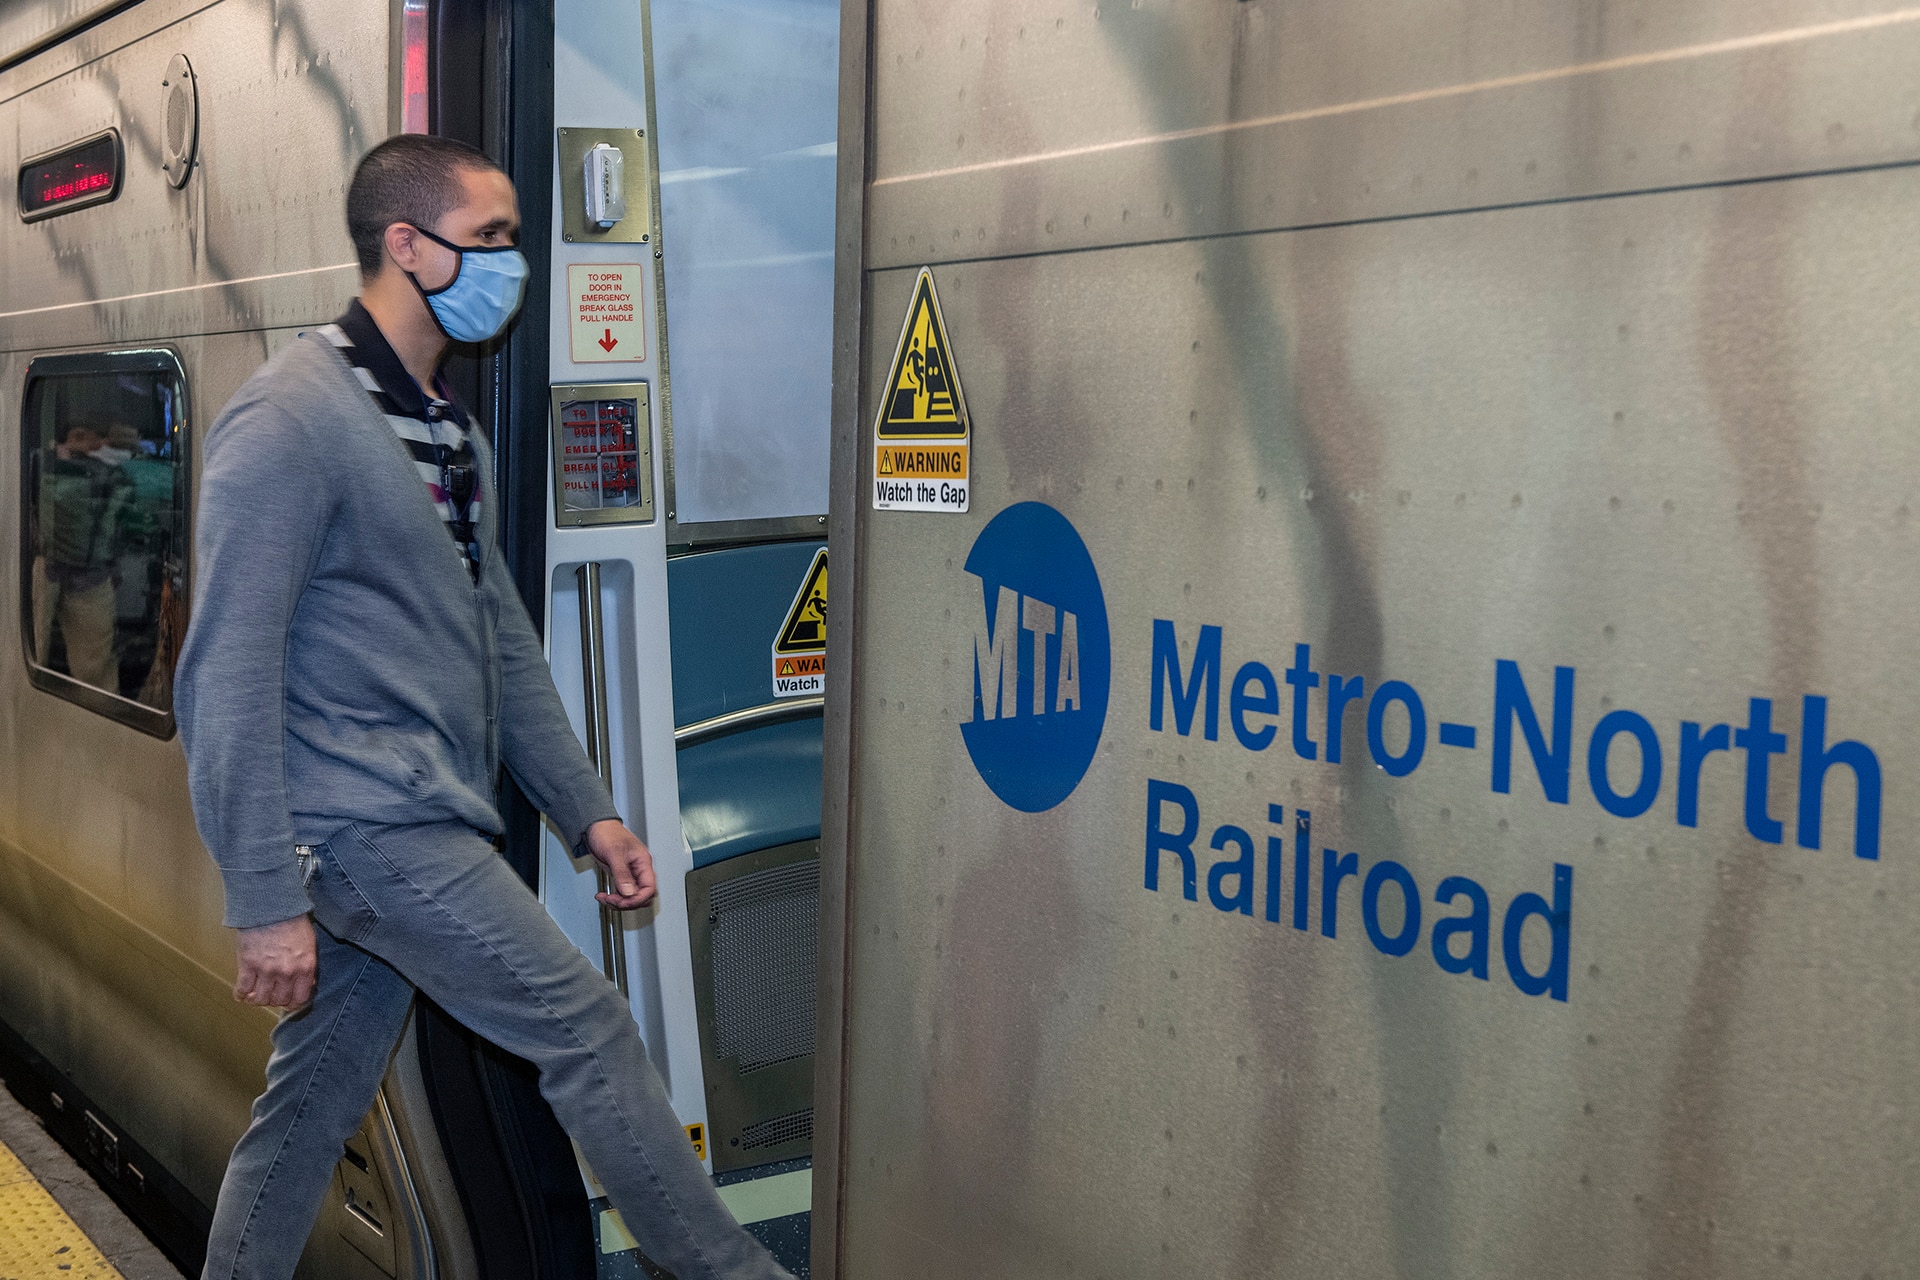 Metro-North Railroad to Increase Weekday Service Starting March 27